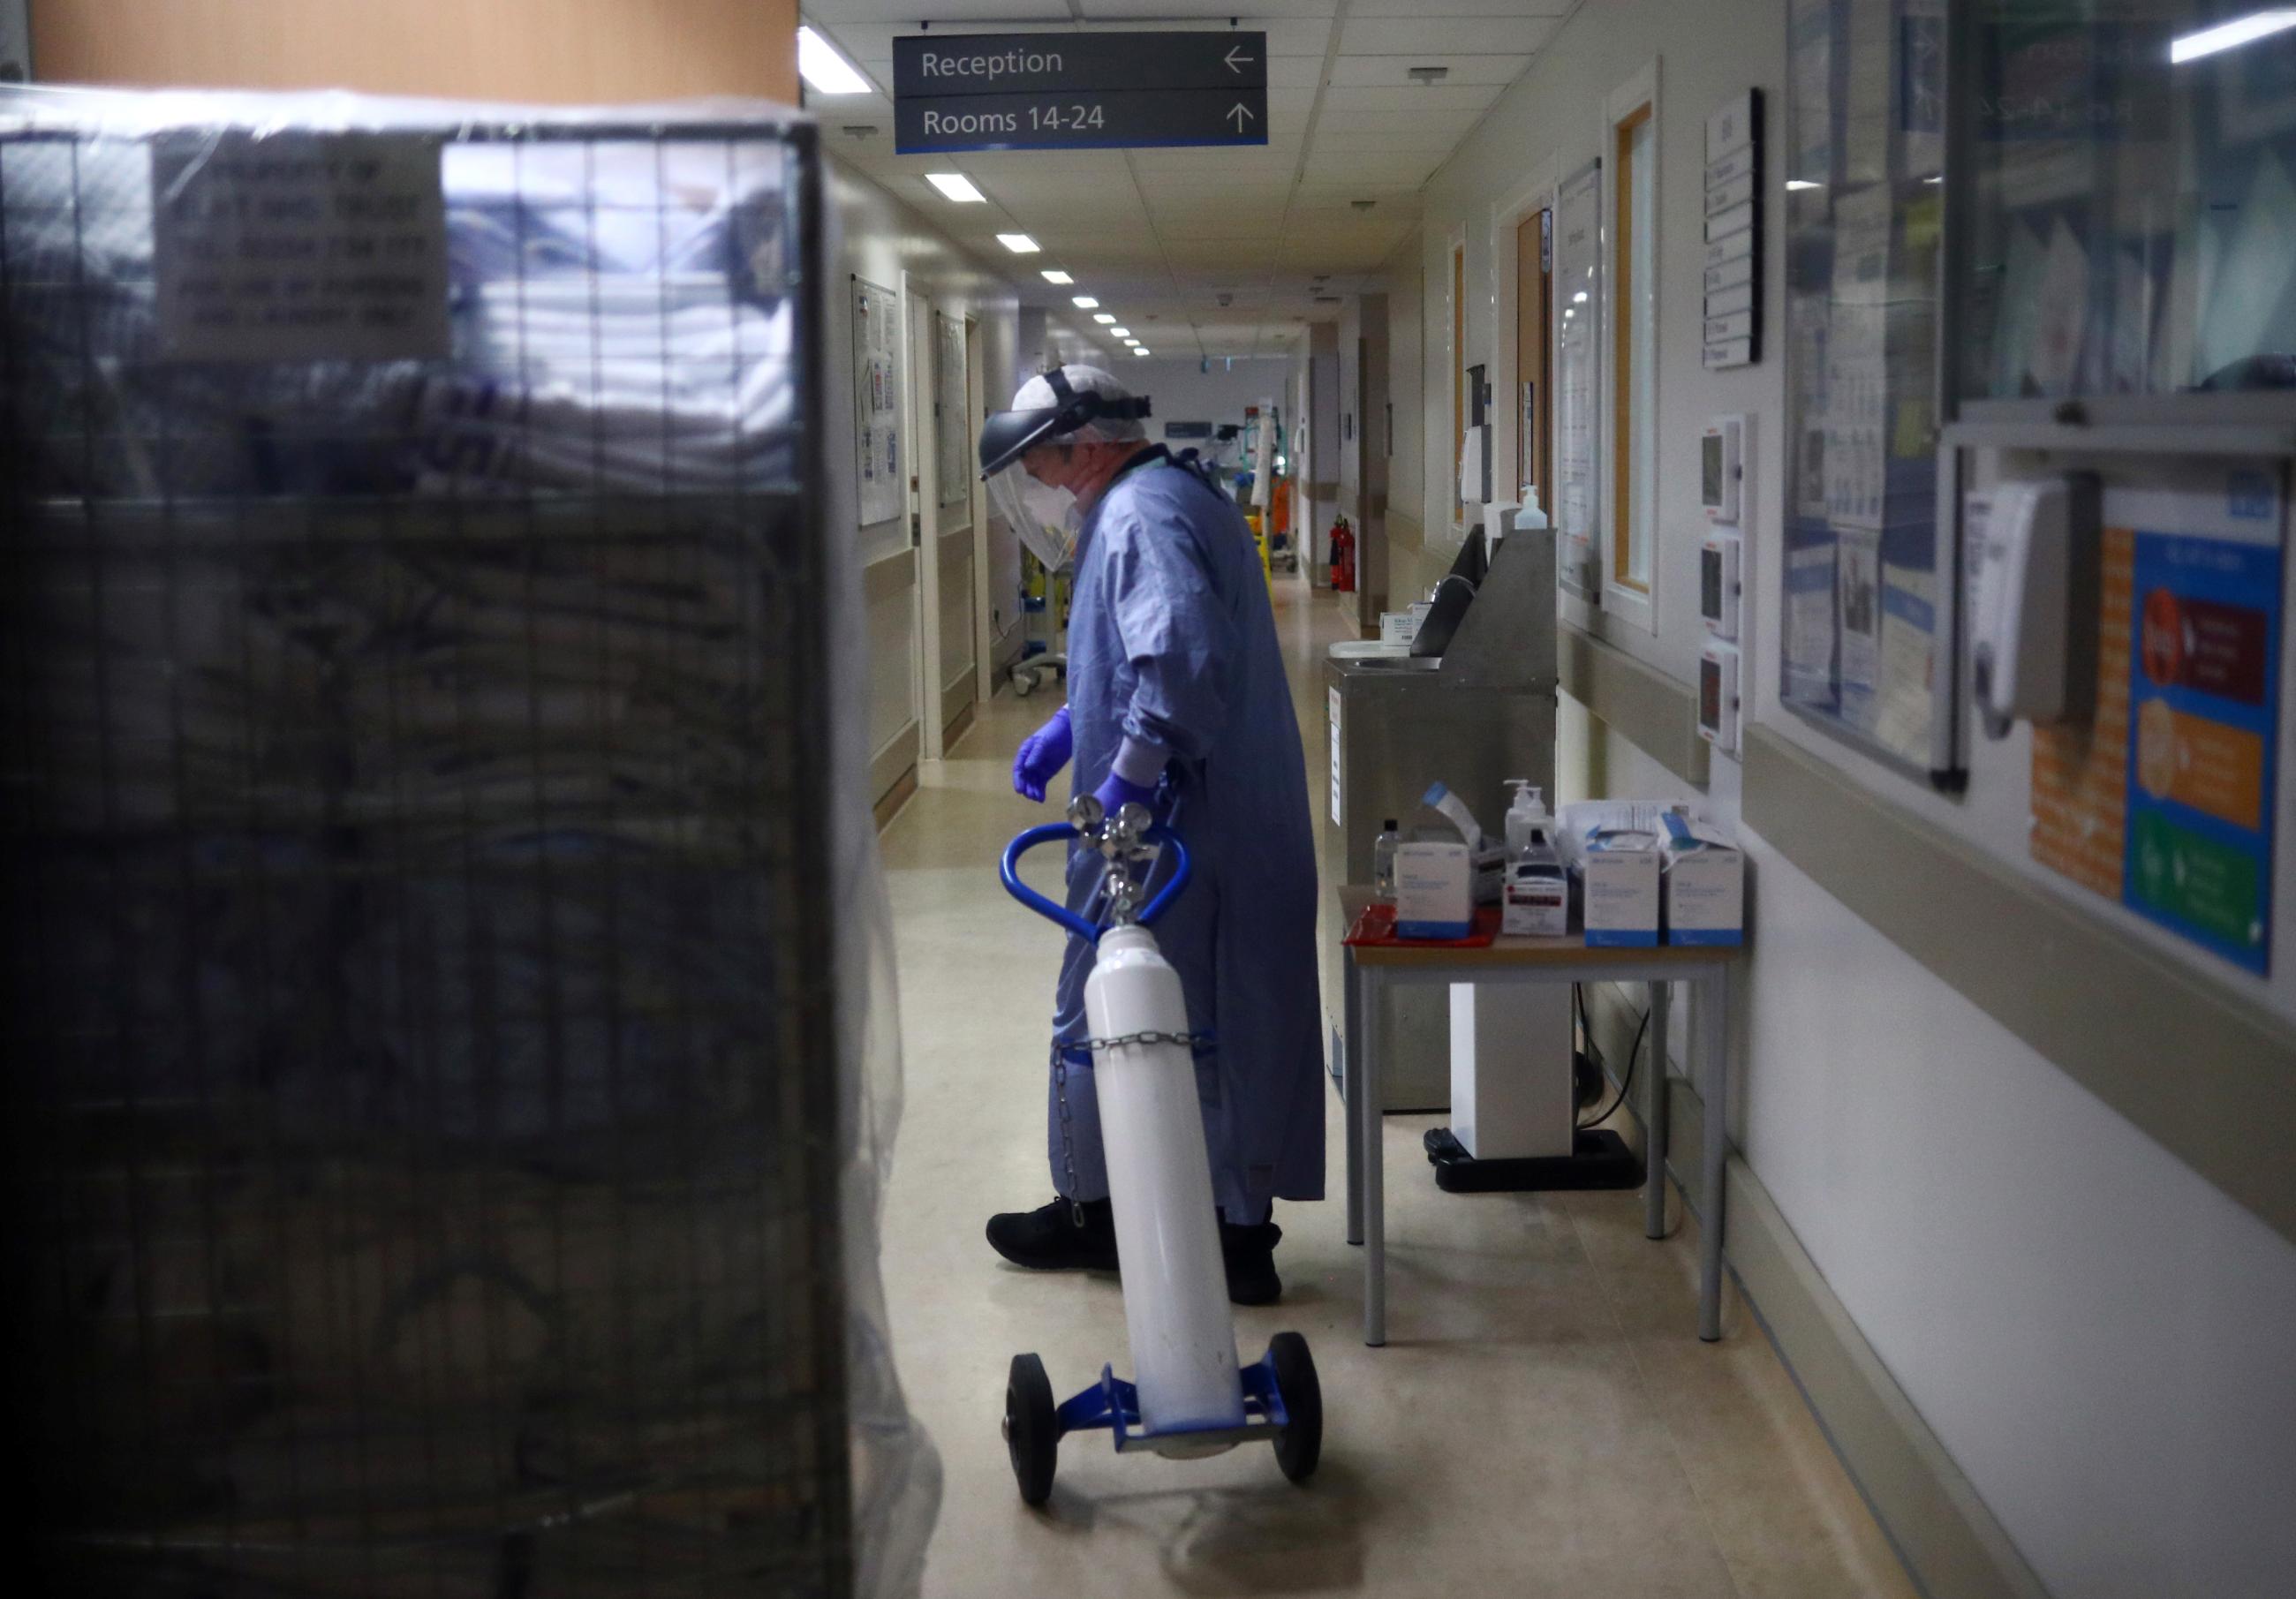 A medical worker moves an oxygen tank in the Critical Care Unit at The Royal Blackburn Teaching Hospital in East Lancashire, following the outbreak of the coronavirus disease (COVID-19), in Blackburn, Britain, May 14, 2020.